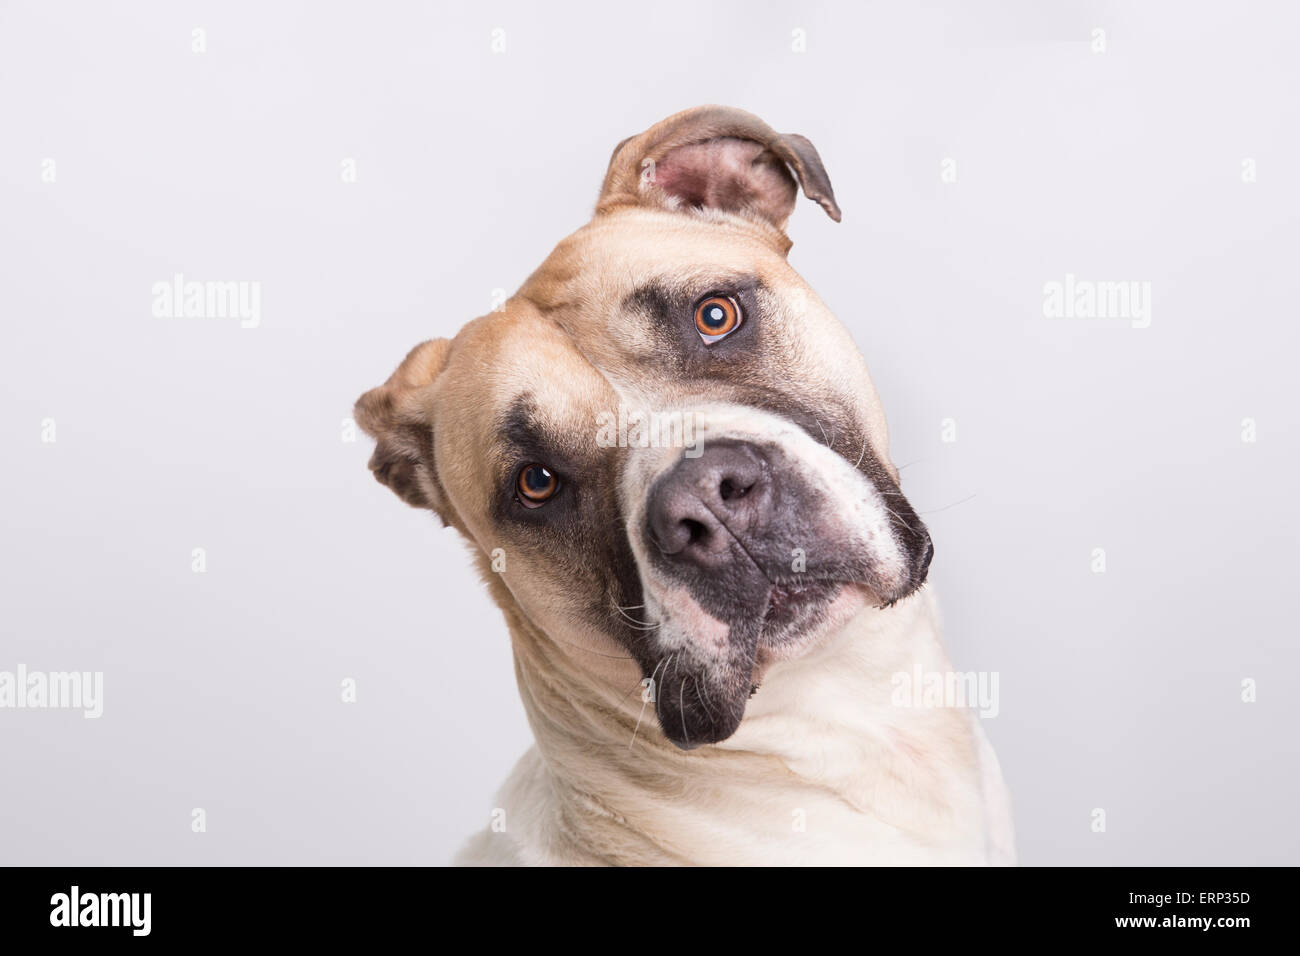 South African Boerboel Dog - Rare Breed Stock Photo